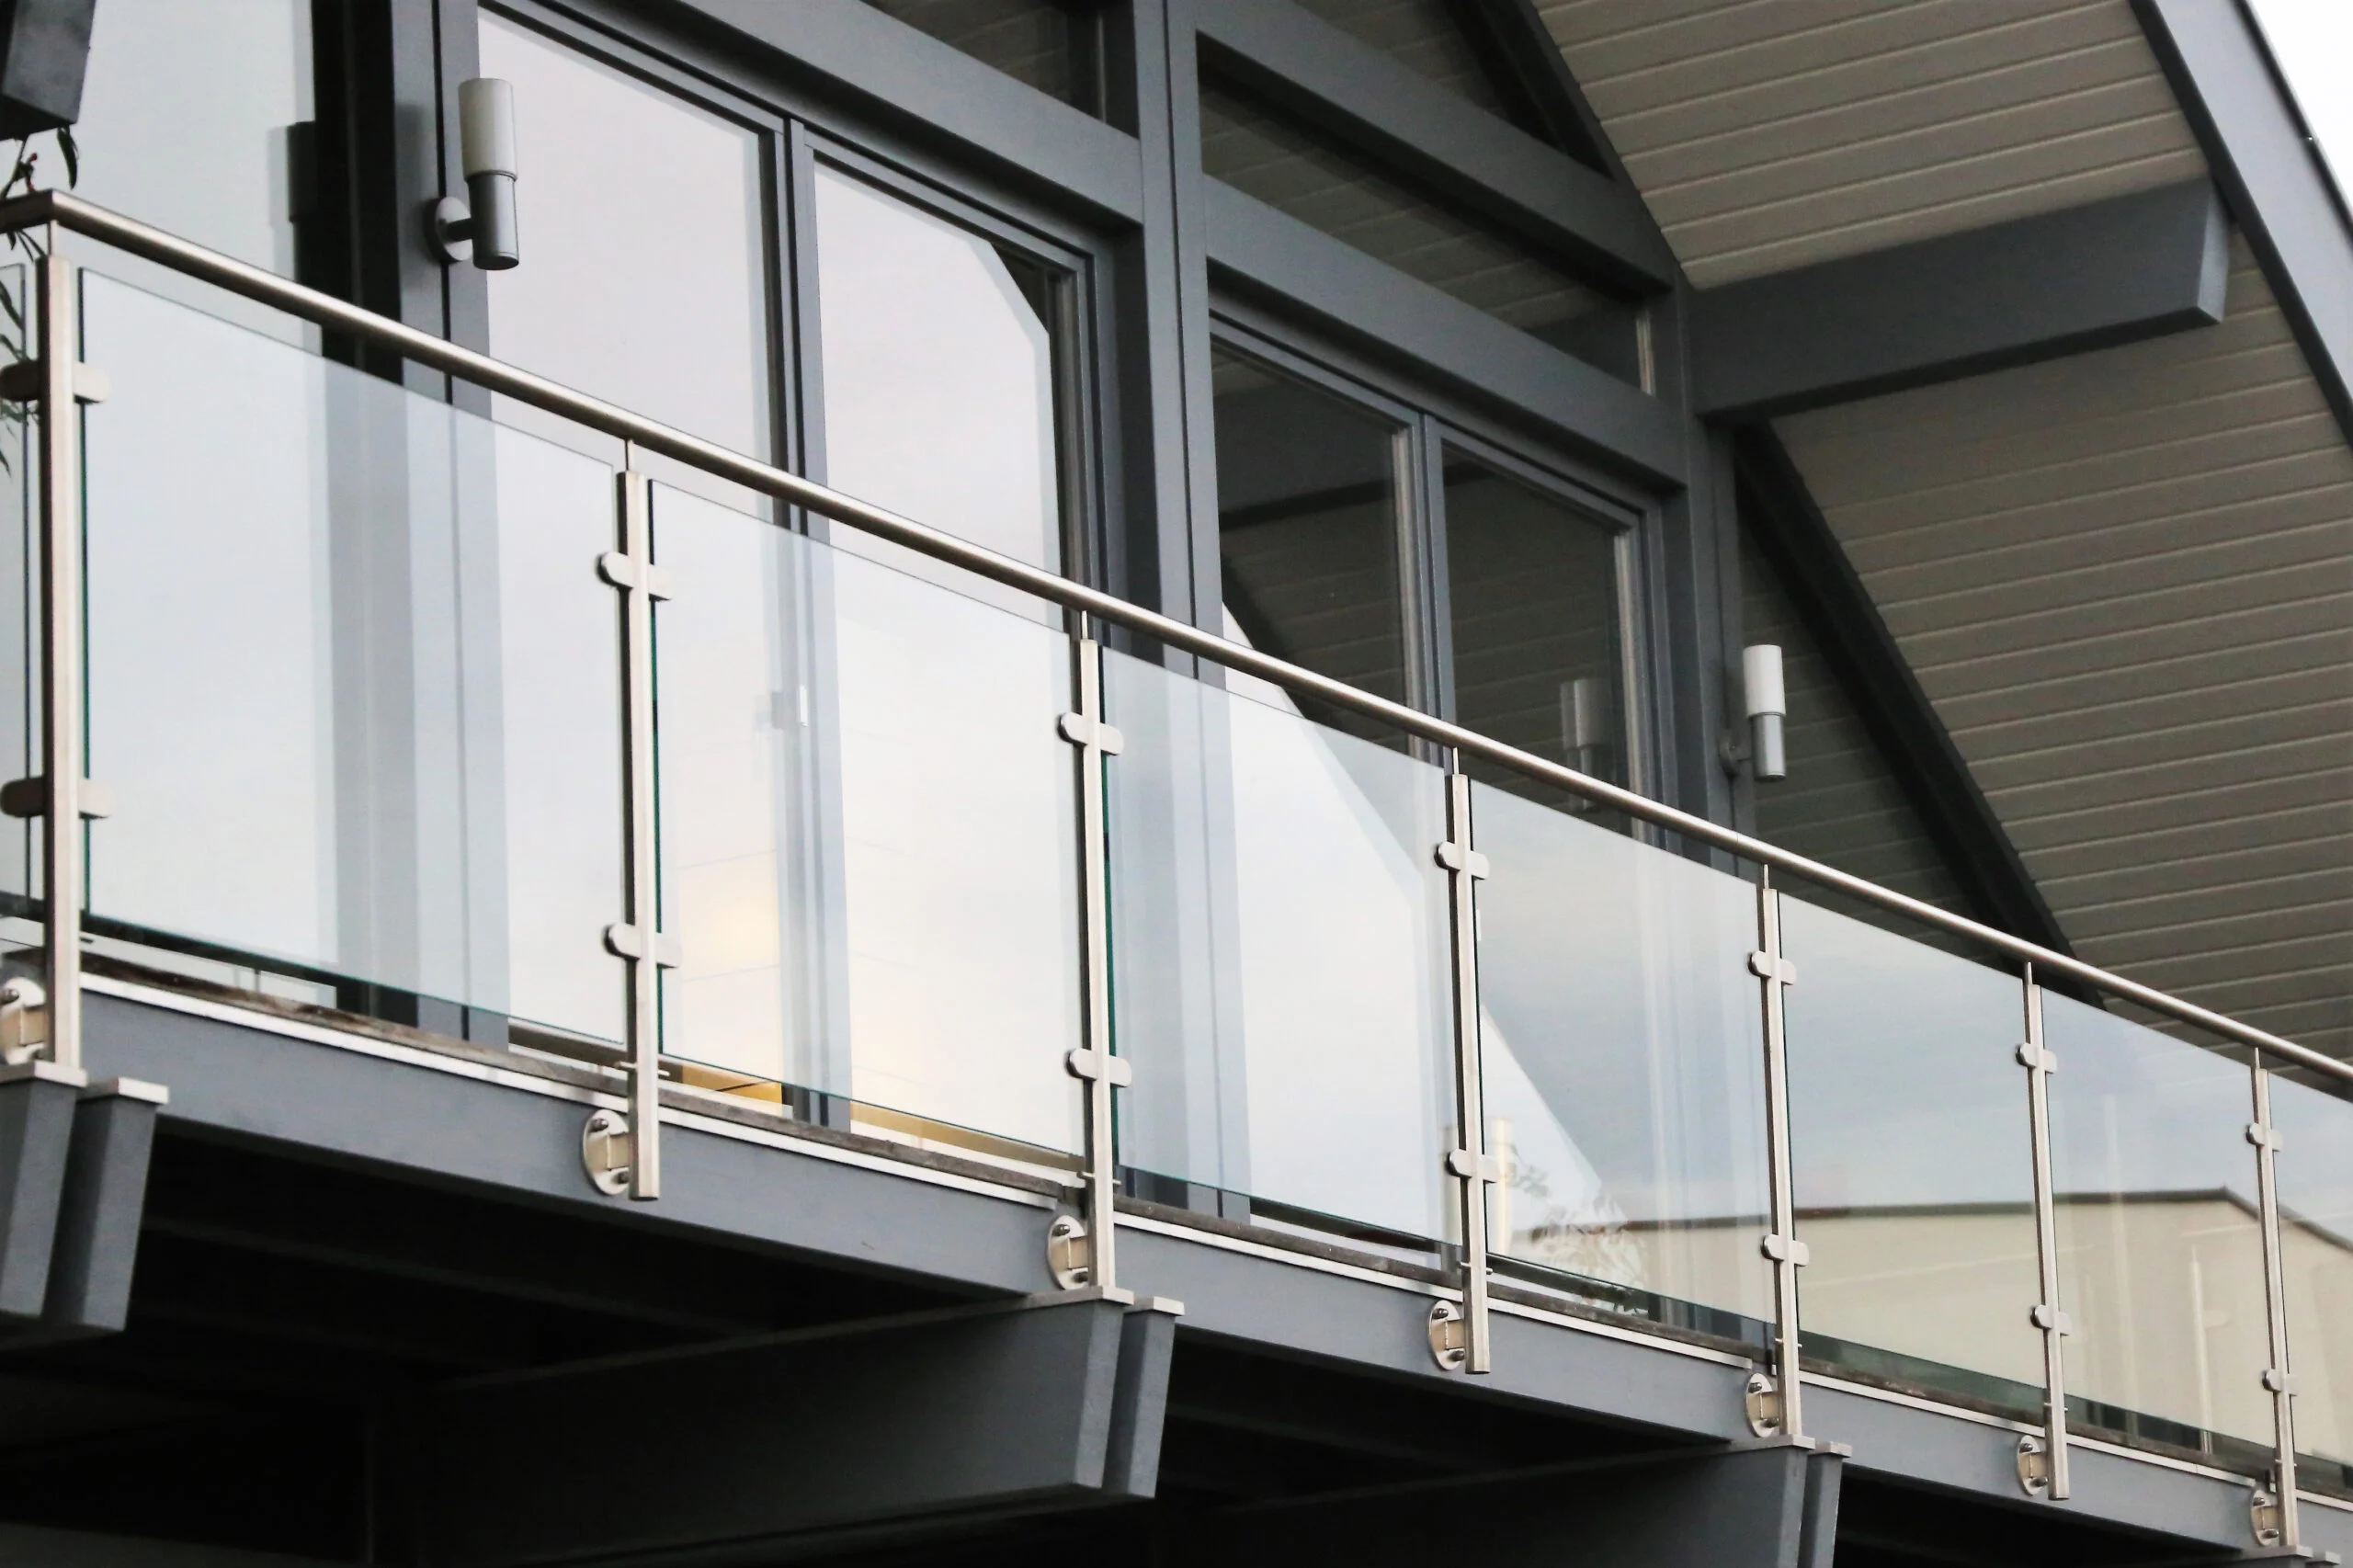 Clear glass balustrade on a balcony.